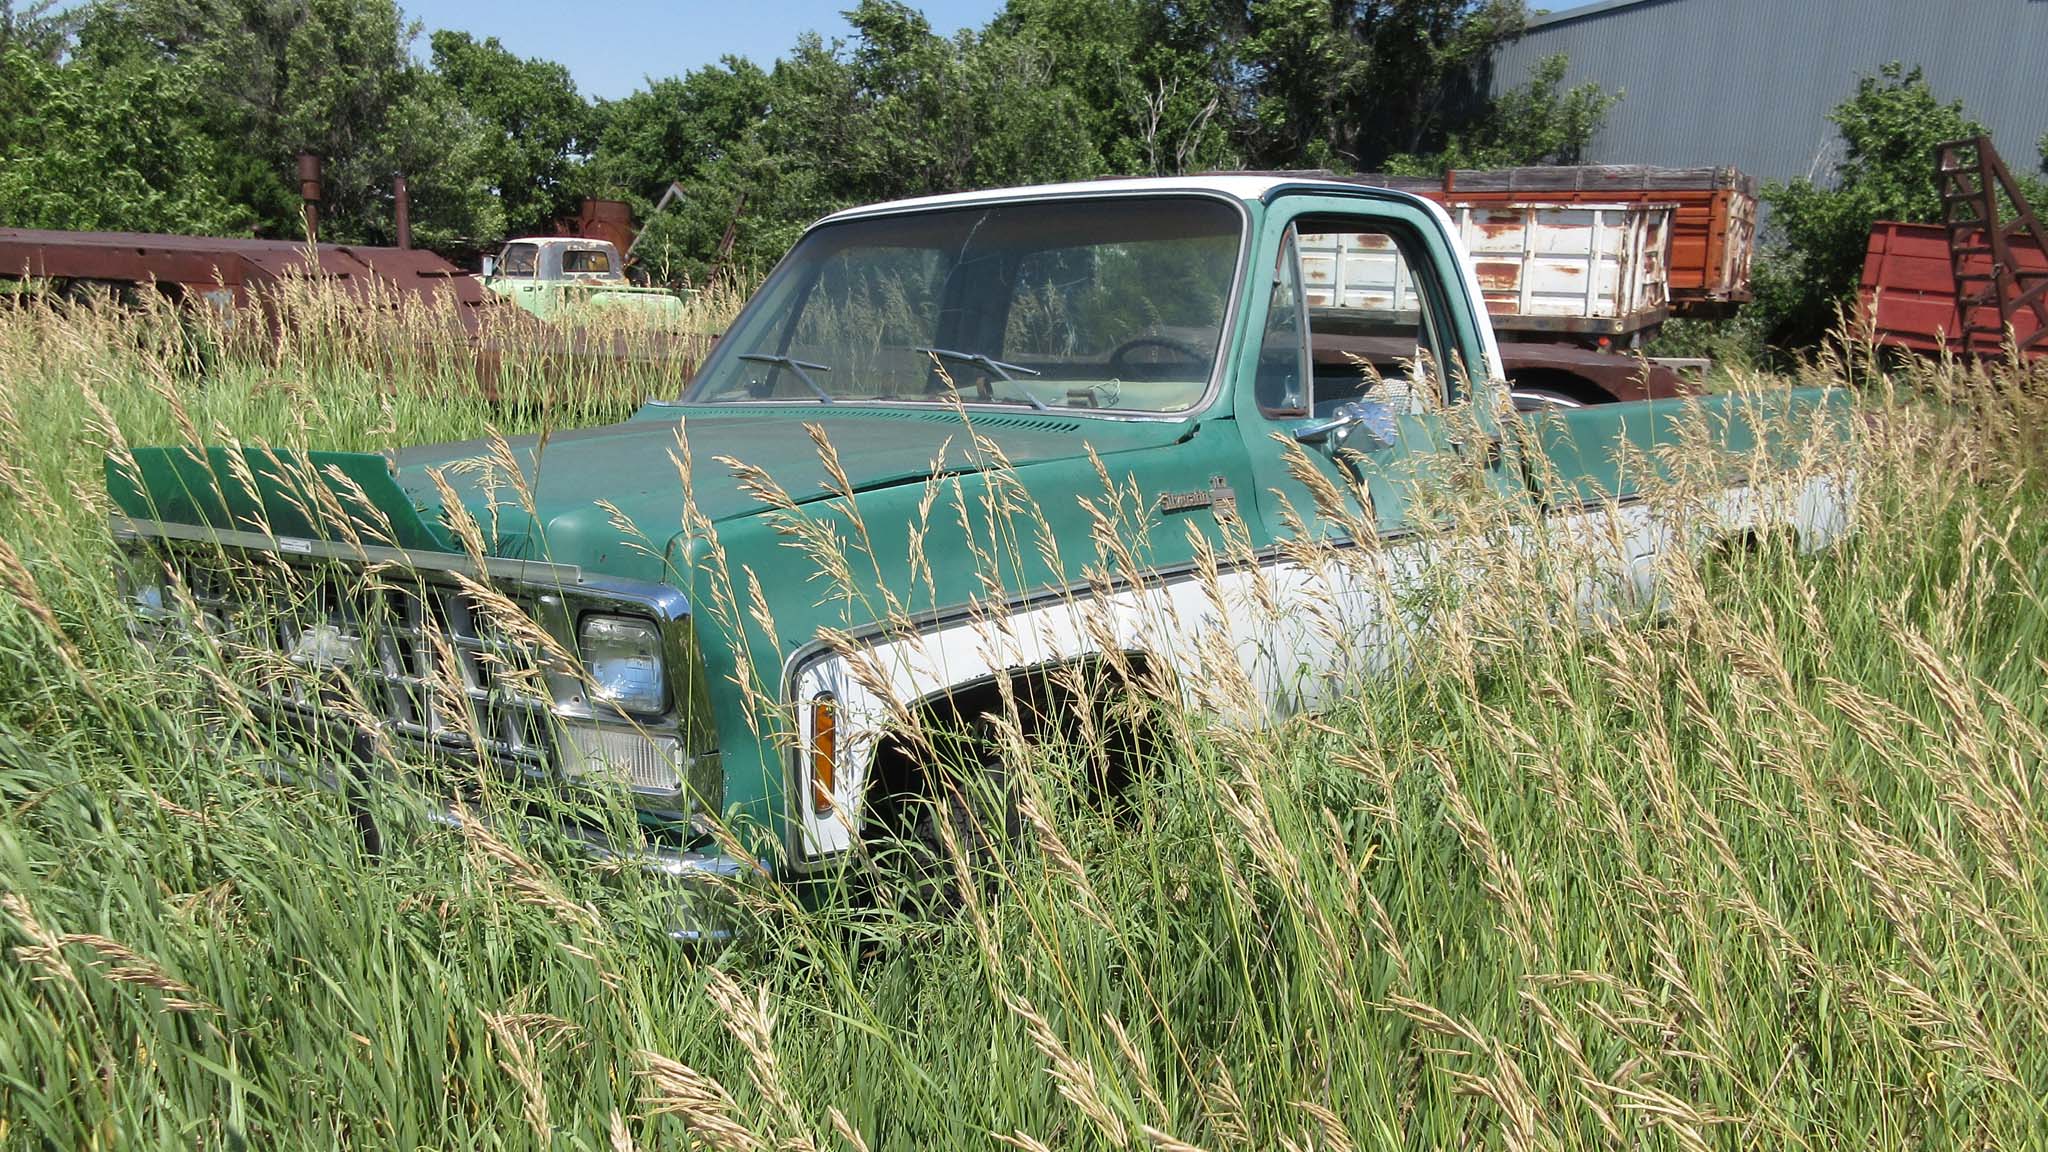 Chevy C10 Square Body Diesel Truck Found In A Field